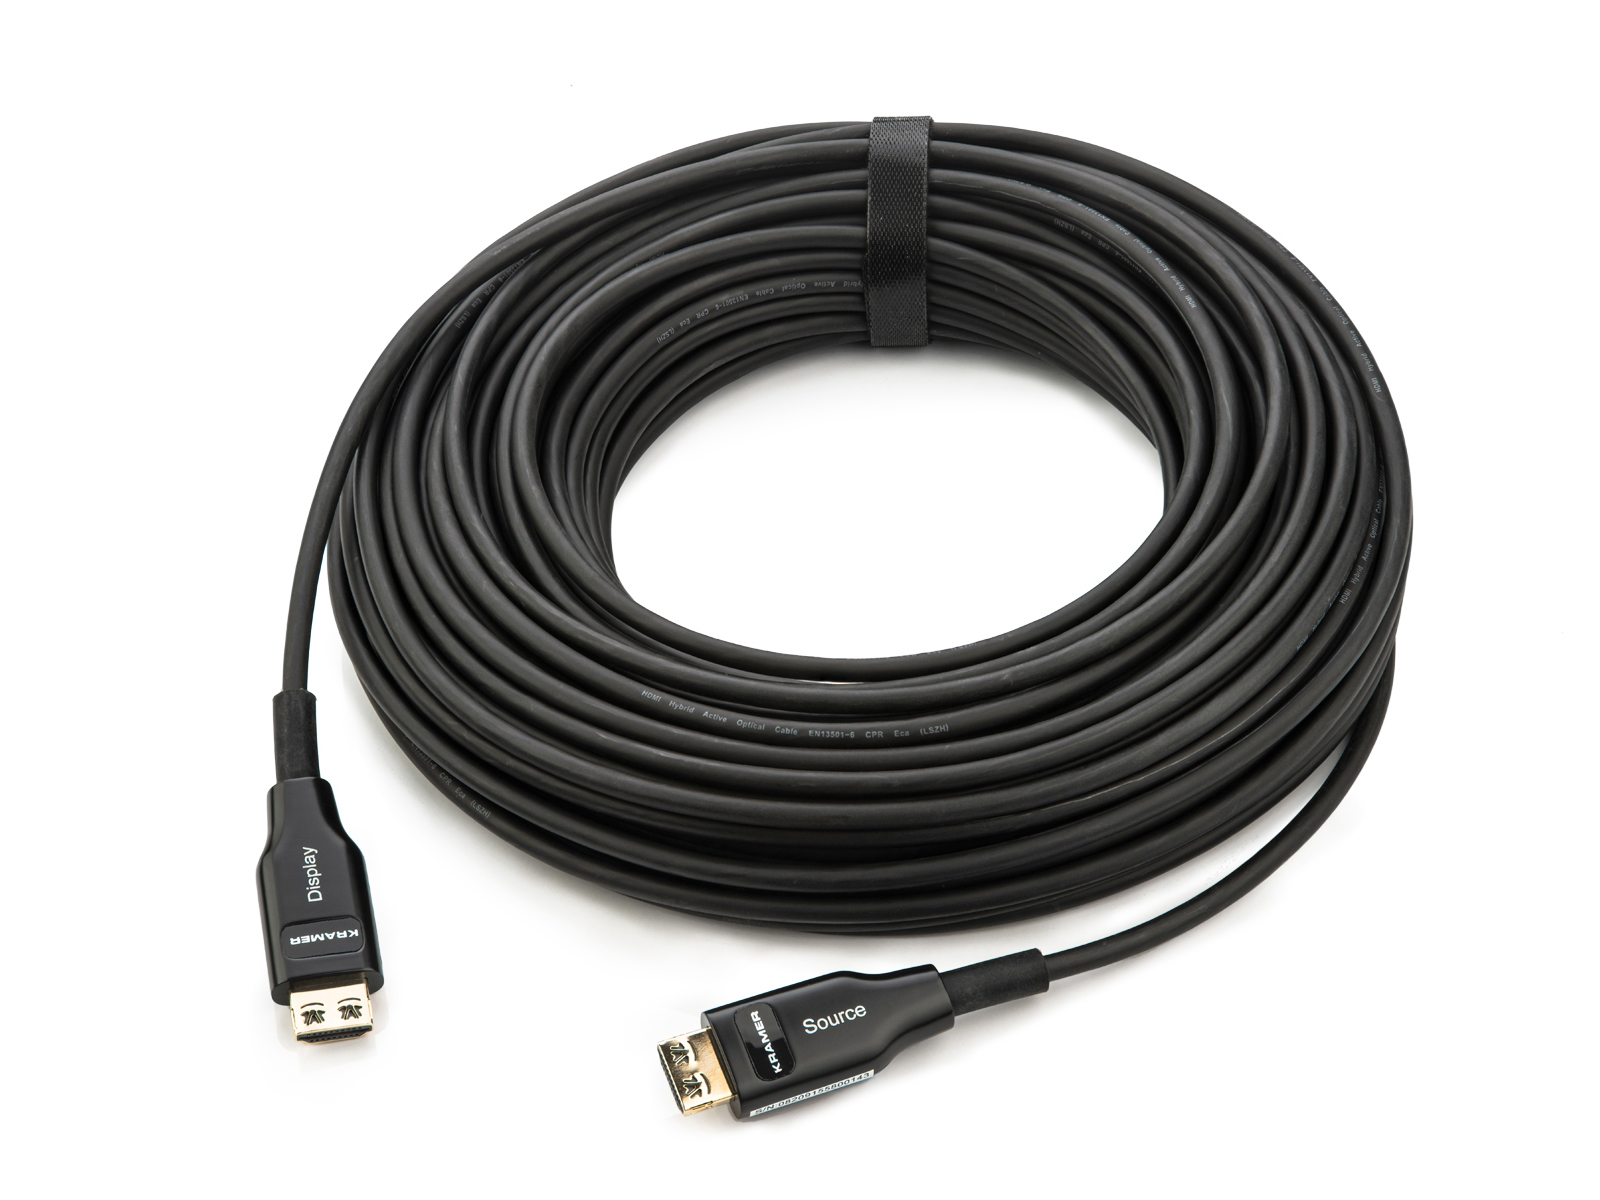 CP-AOCH/60F-197 60m/197ft High-Speed HDMI Optic Hybrid Cable - Plenum Rated by Kramer